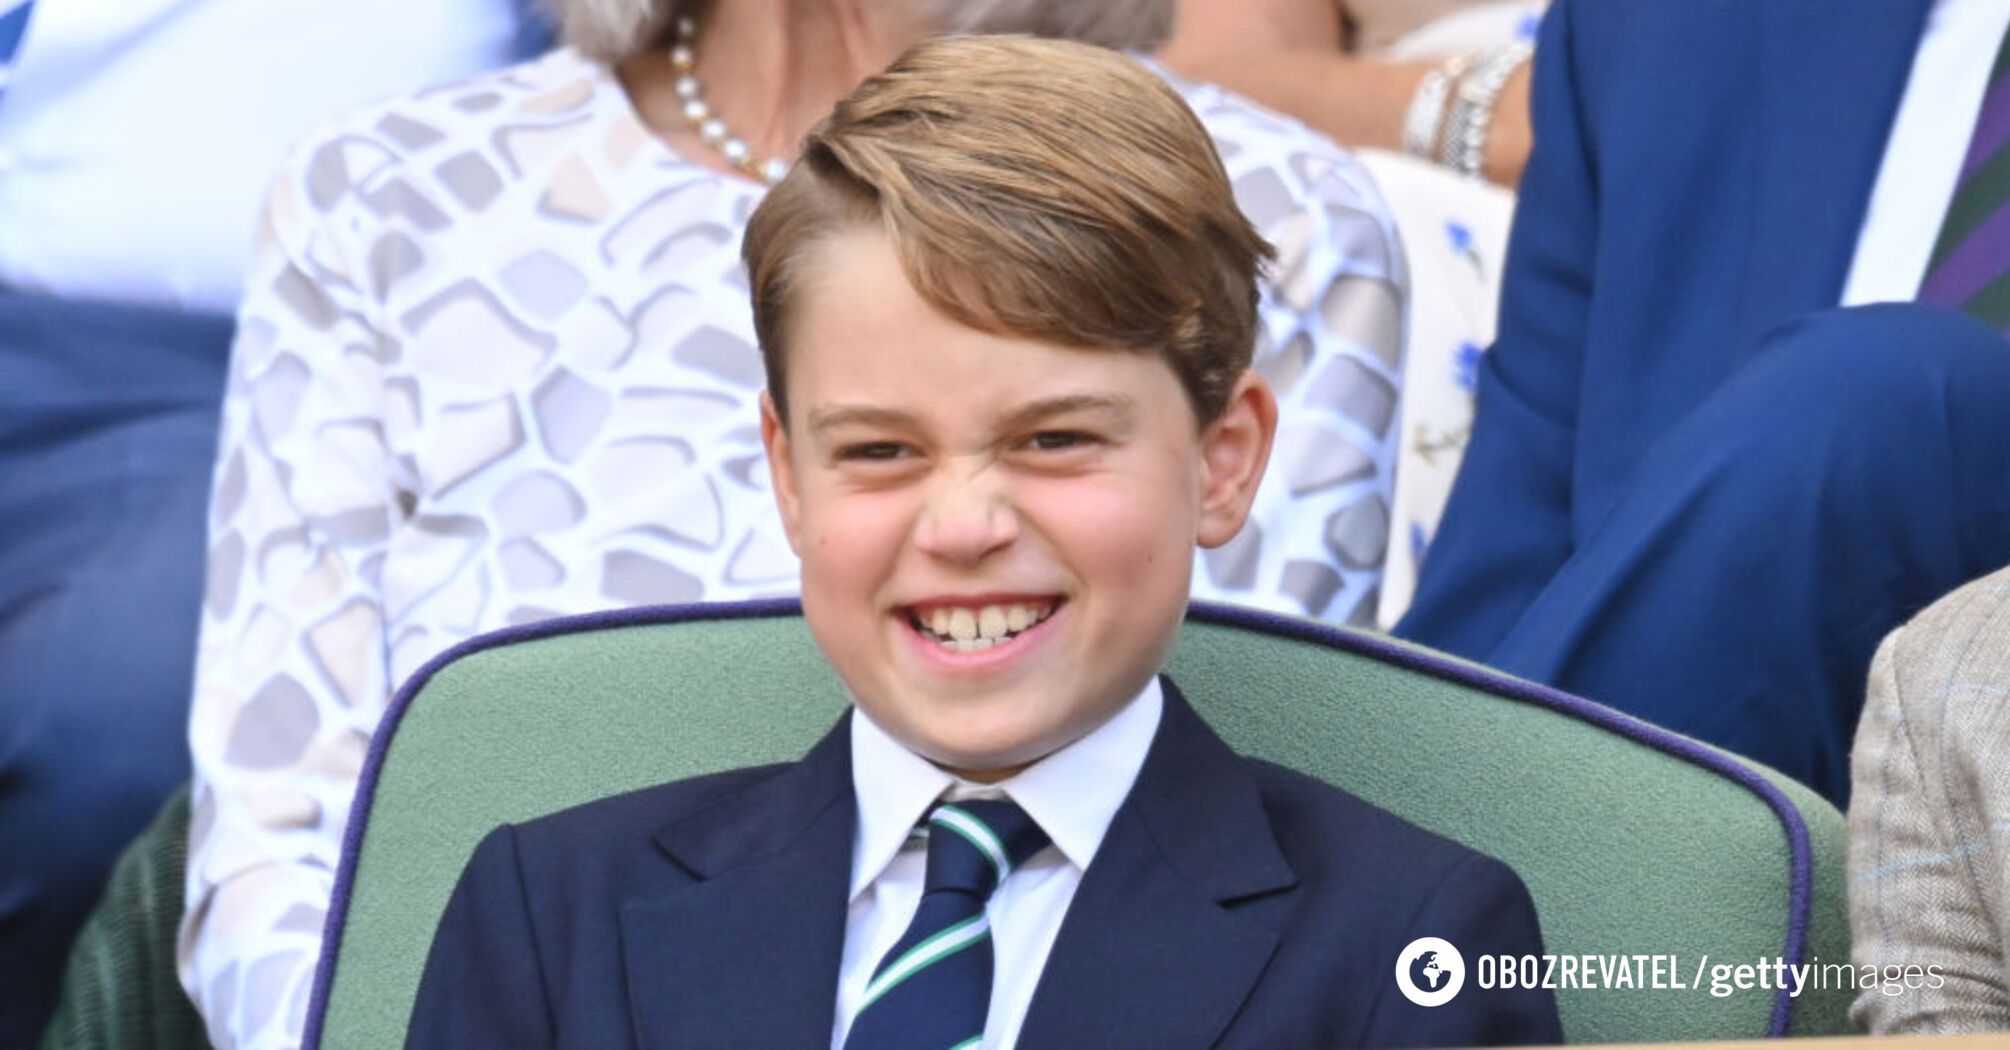 Kate Middleton's eldest son Prince George broke protocol by coming to a meeting with Obama in a bathrobe